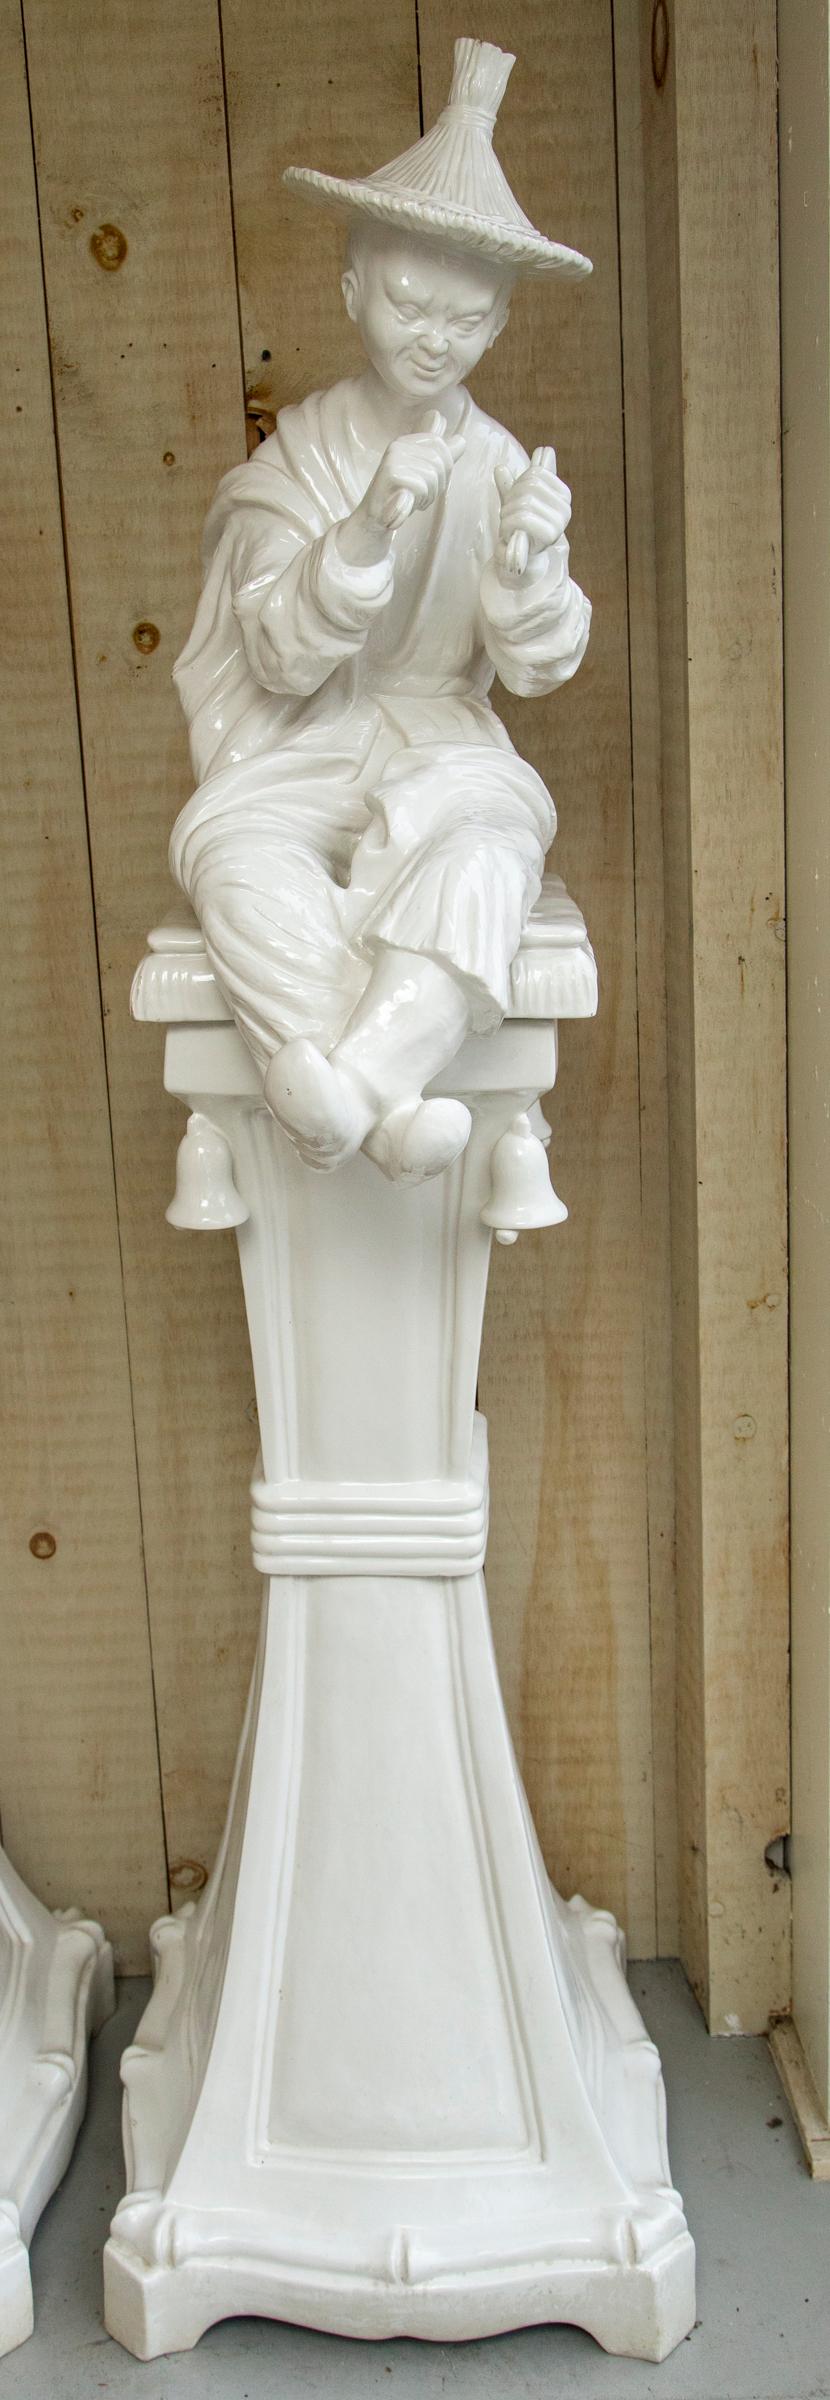 The white glaze over terracotta. Made in three sections, bottom of pedestal, middle of pedestal, and the figure atop. Concave sides, shaped square base. Bells hang from below the fronts of the figures. Paper tag says Italy.
The  figure wears a straw